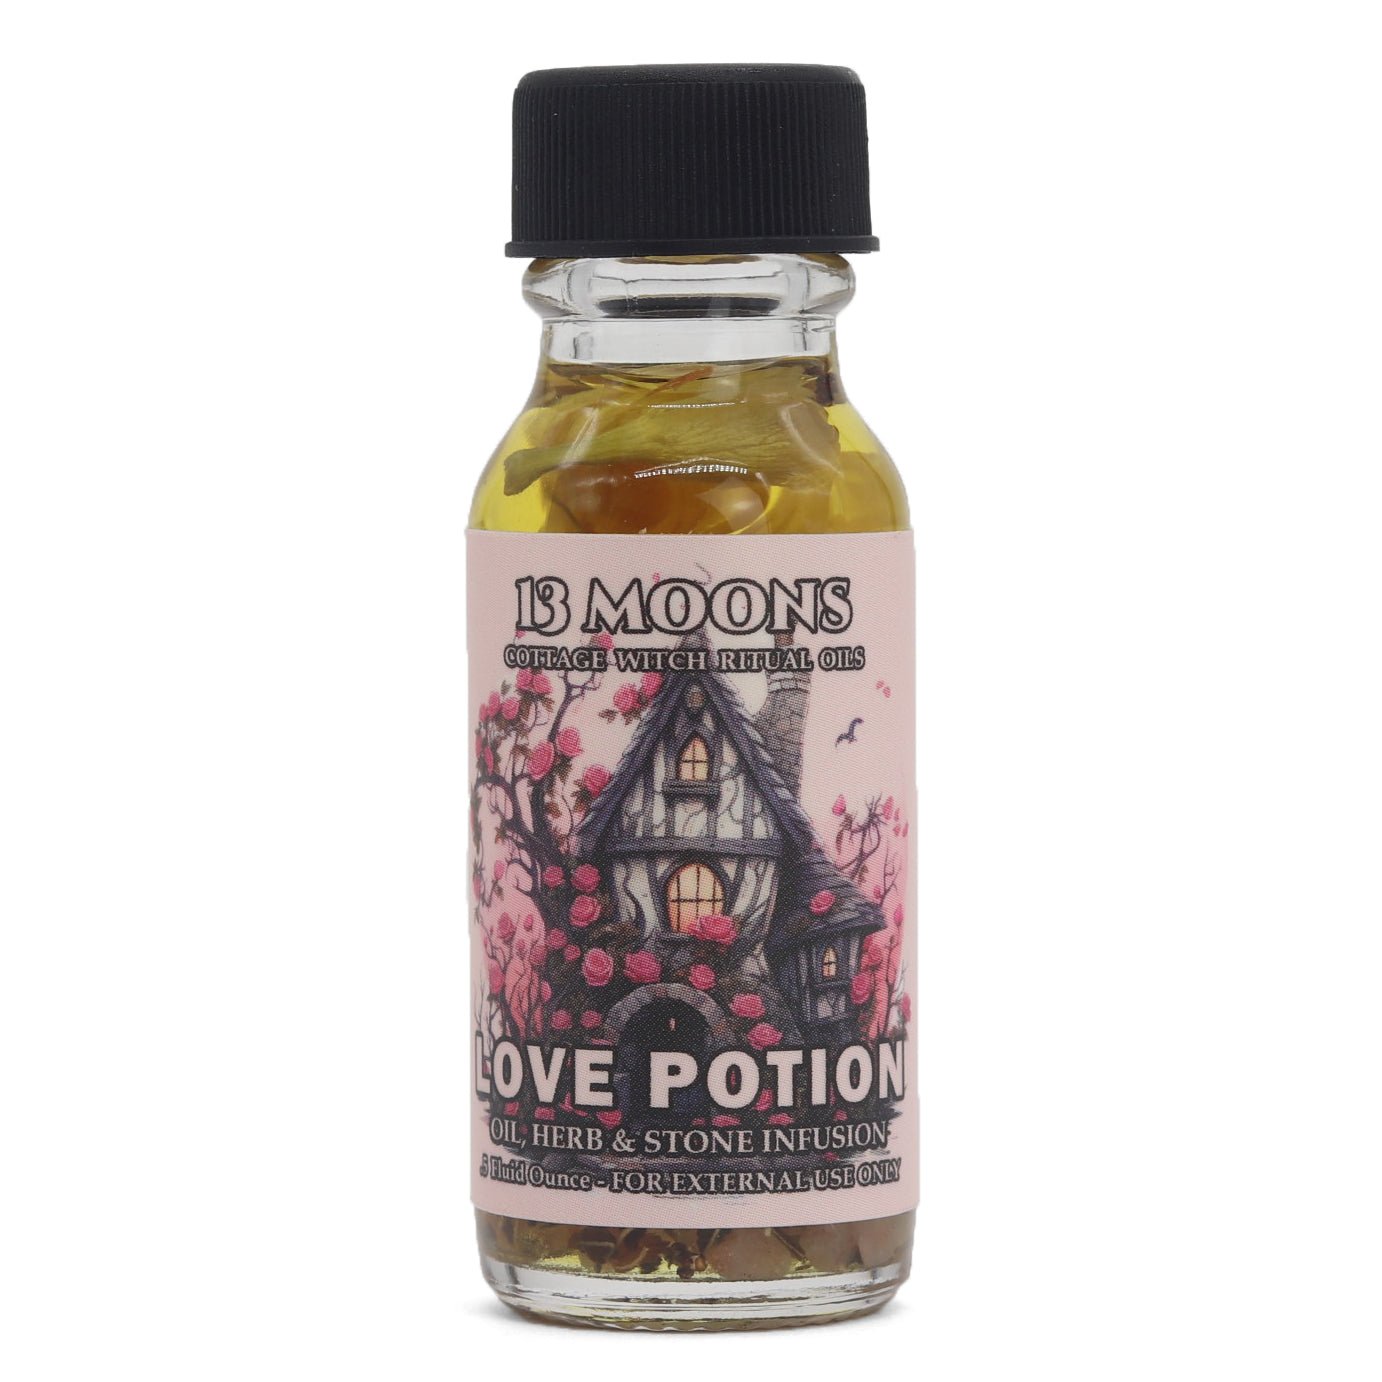 Love Potion Ritual Oil by 13 Moons - 13 Moons